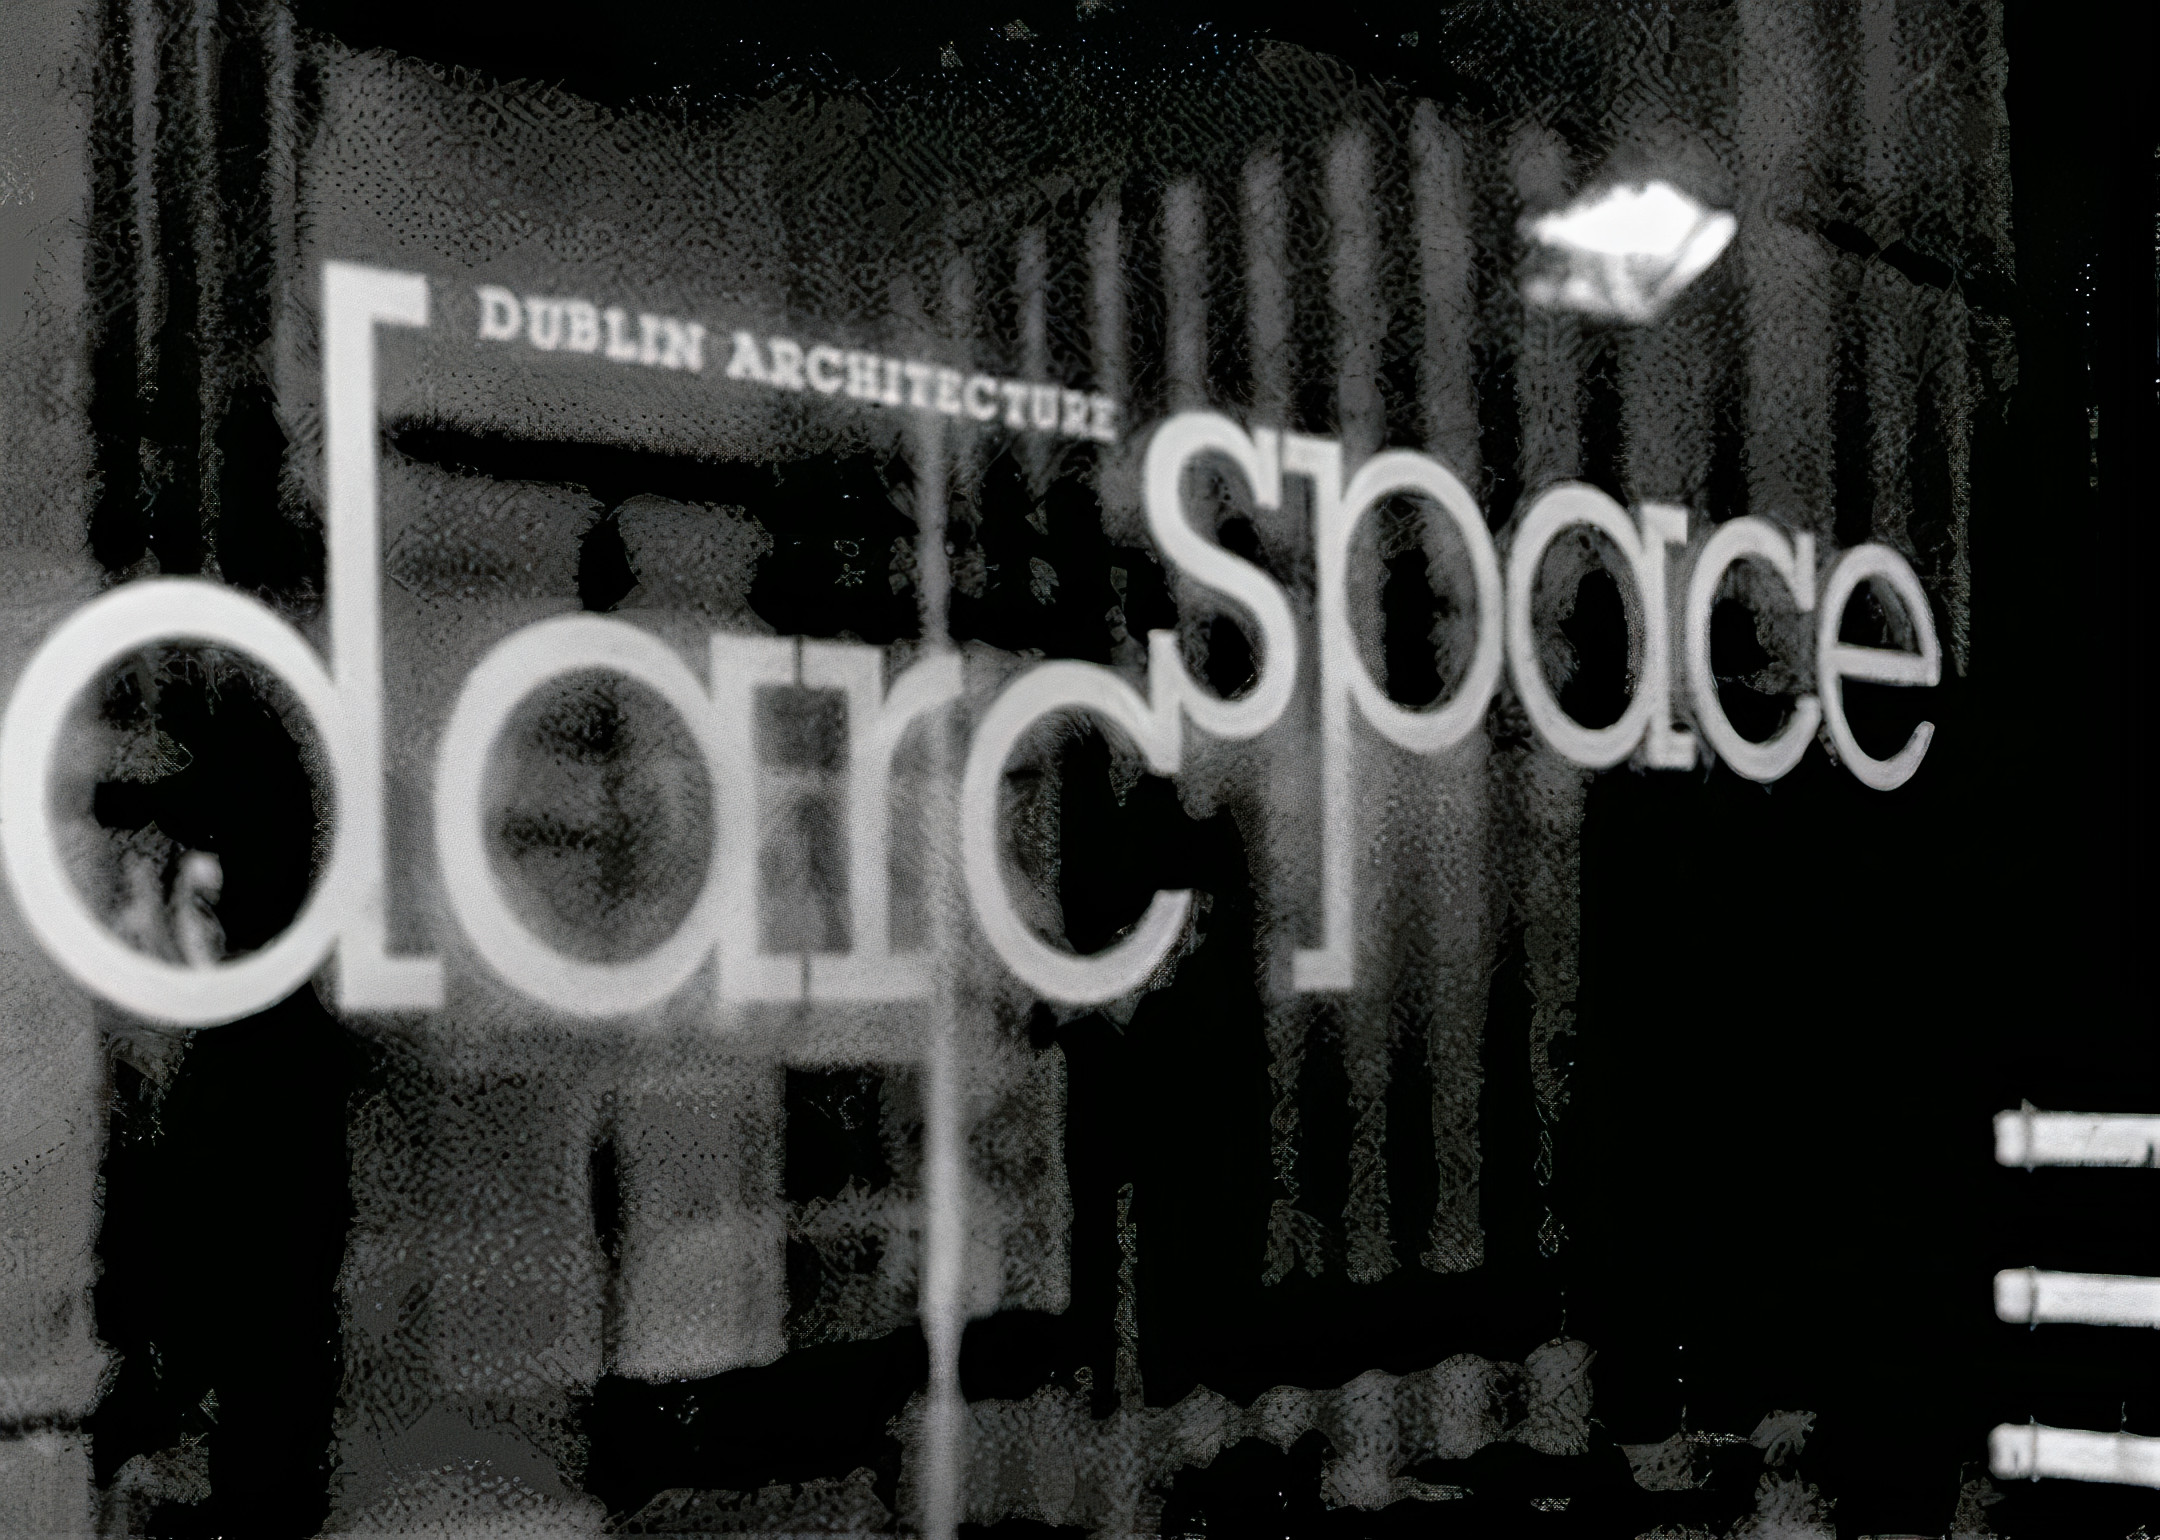 Event: darcspace as part of Open House 2010 programme